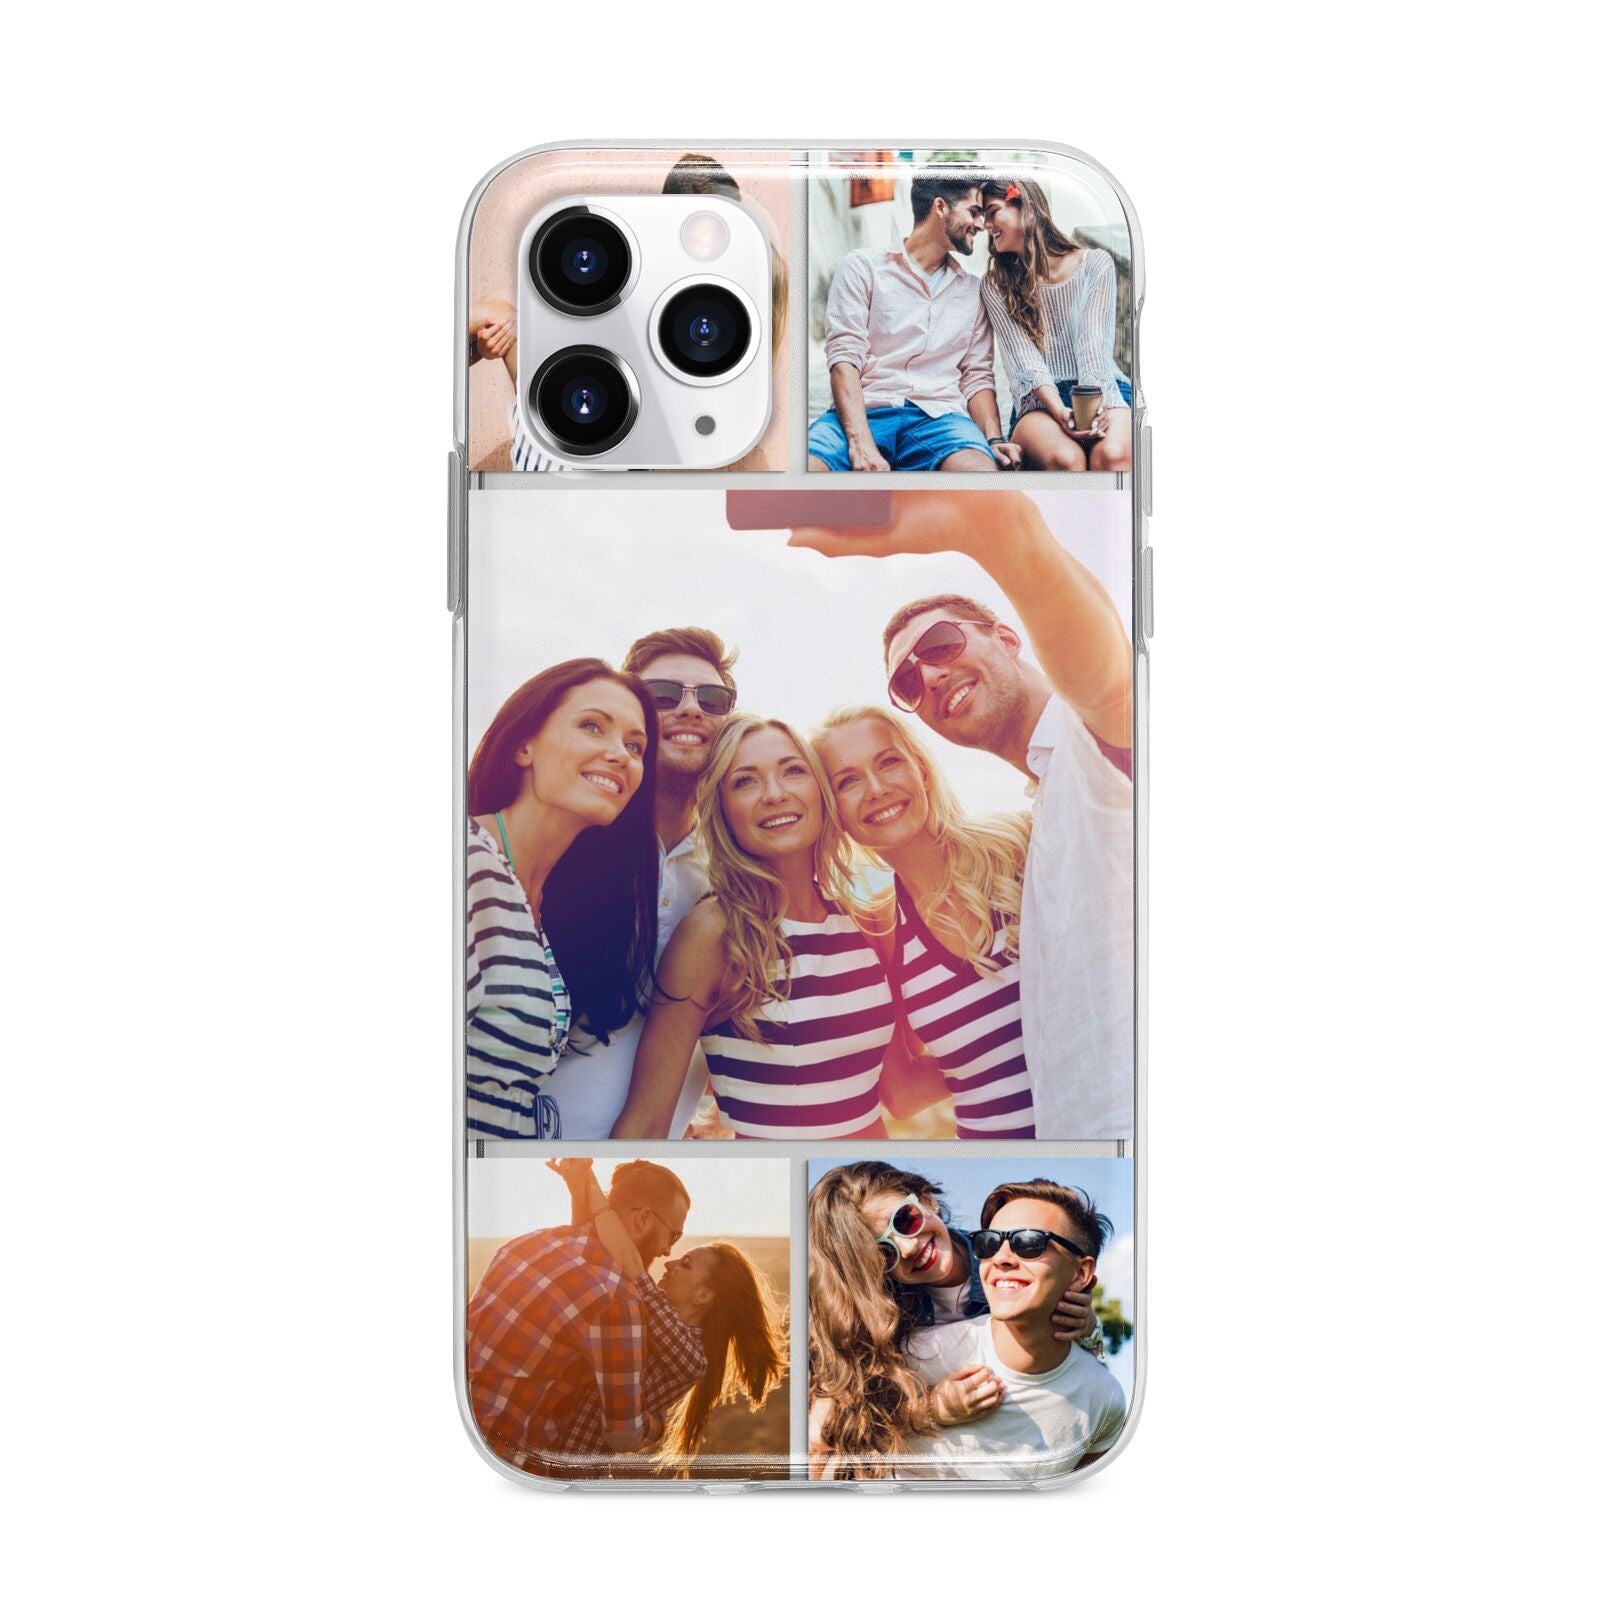 Tile Photo Collage Upload Apple iPhone 11 Pro in Silver with Bumper Case